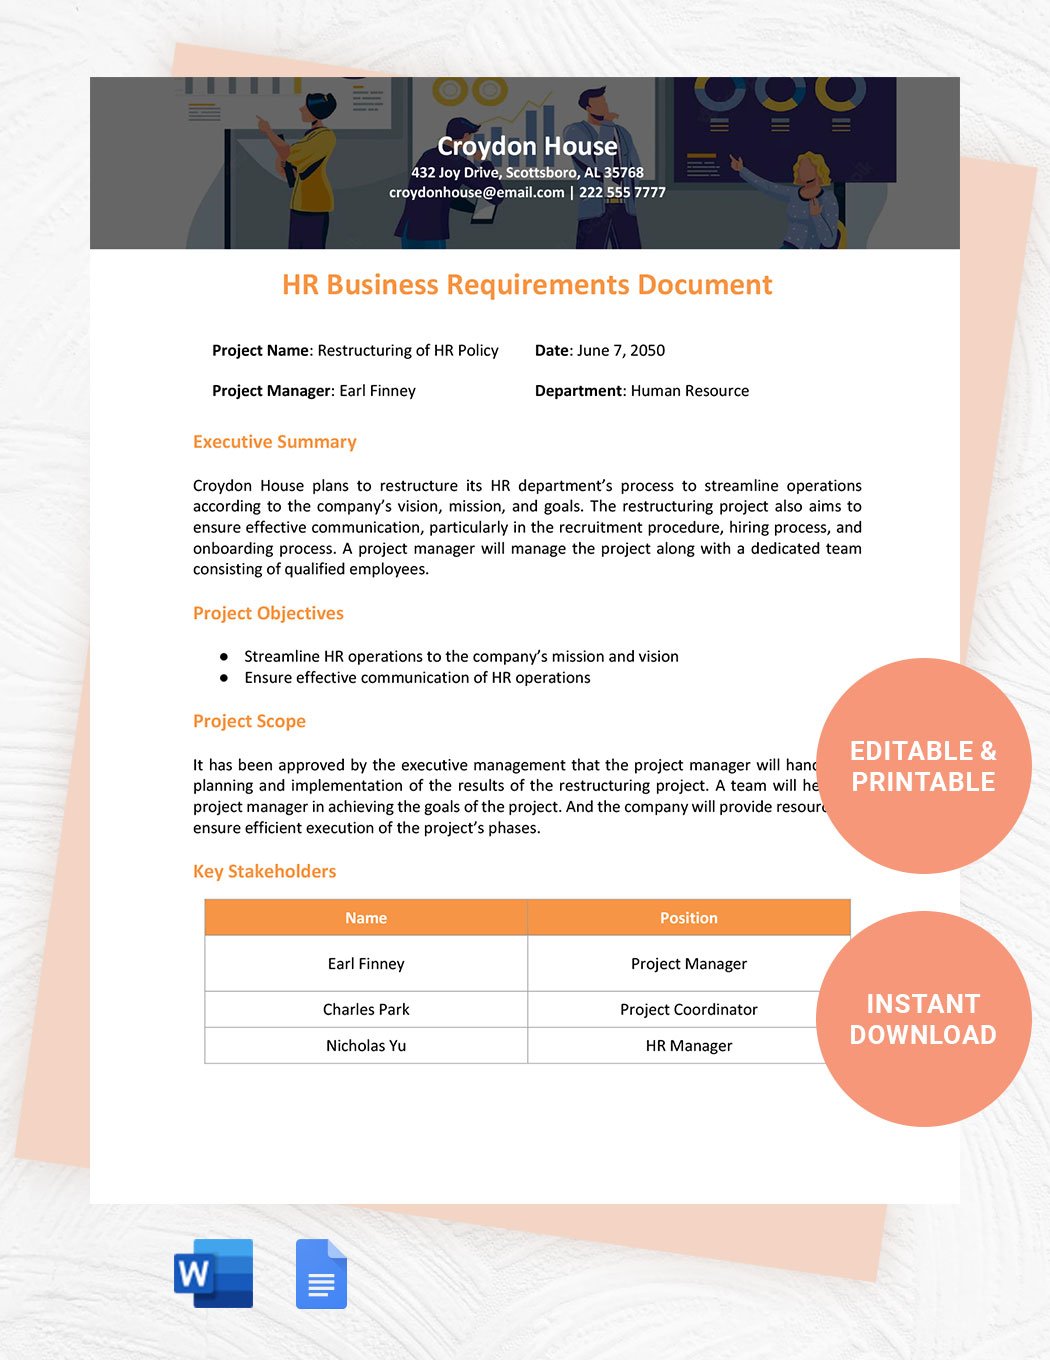 HR Business Requirements Document Template